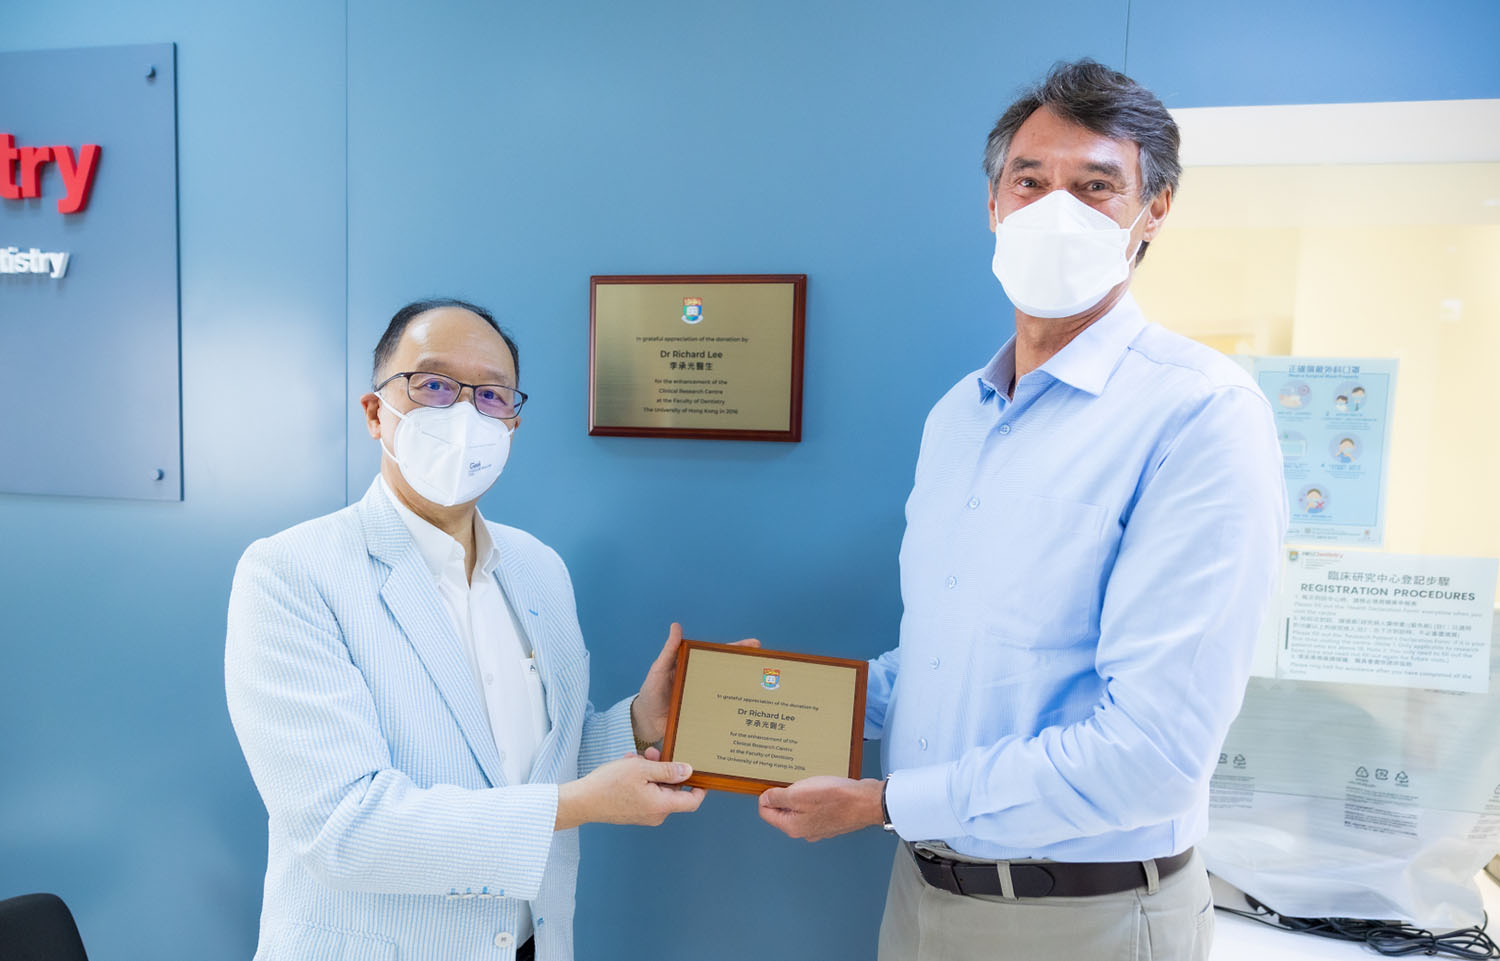 Professor Flemmig (right) presents a plaque to Dr Richard Lee as a token of appreciation